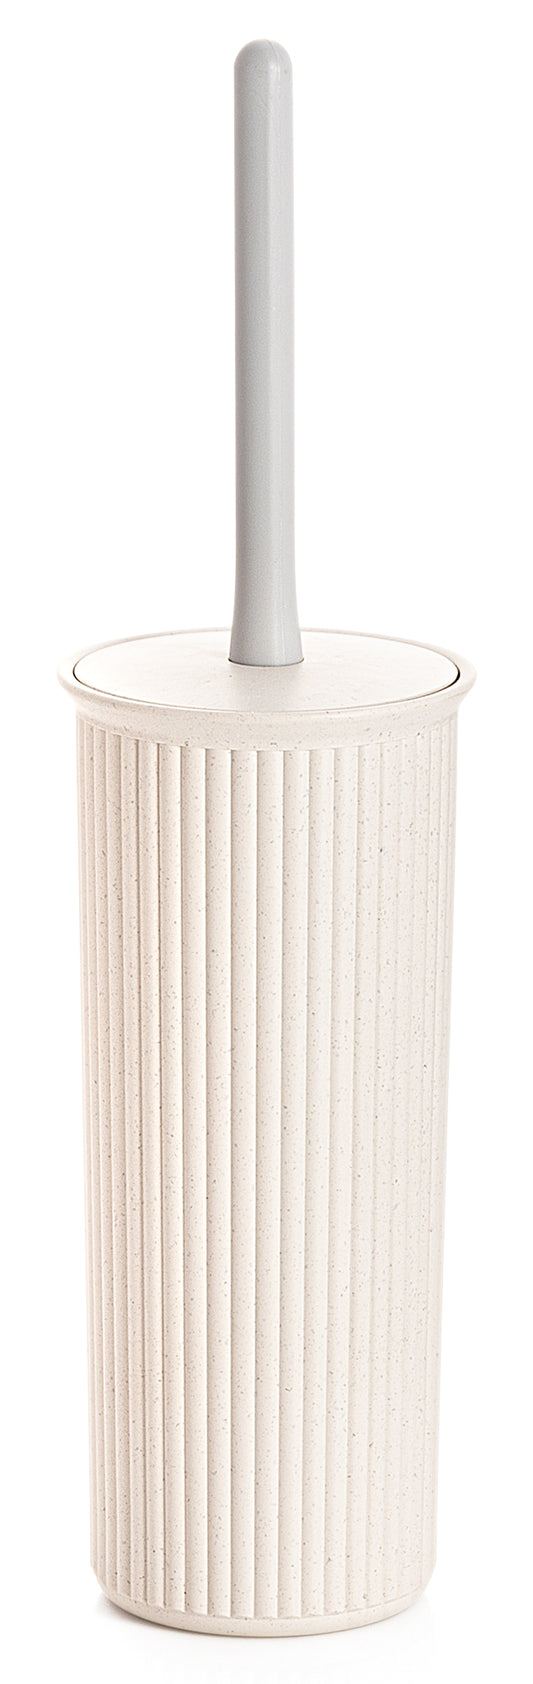 Ribbed Toilet Bowl Brush and Holder Ecohome